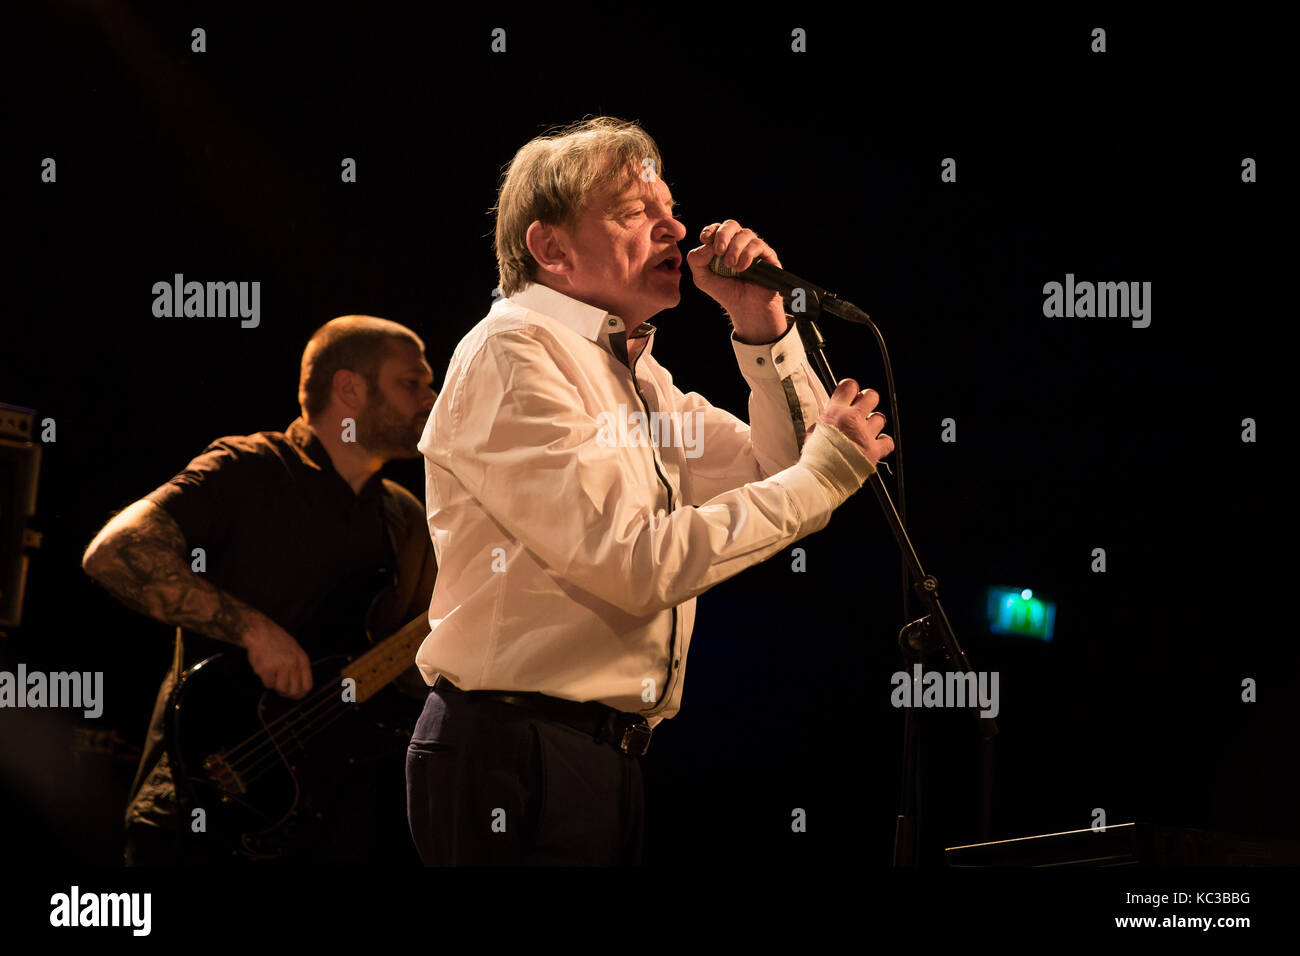 The English post-punk band The Fall performs a live concert at Vulkan Arena as part of Oslo Psych Festival 2016. Here singer, songwriter and musician Mark E. Smith is seen live on stage. Norway, 12/11 2016. Stock Photo